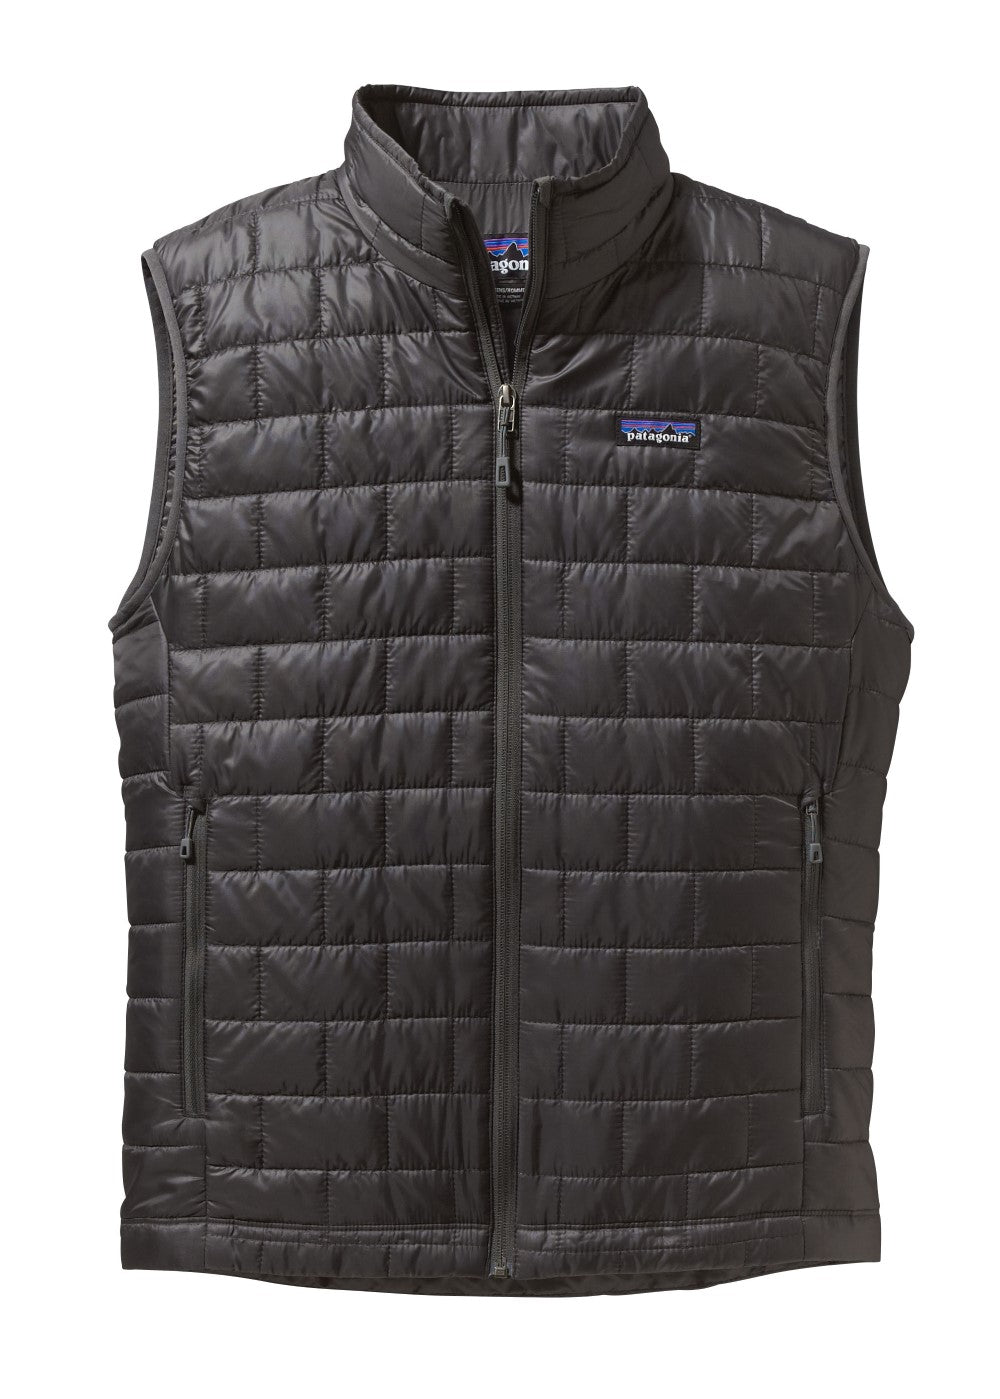 Patagonia Men's Nano Puff® Insulated Vest - Forge Grey